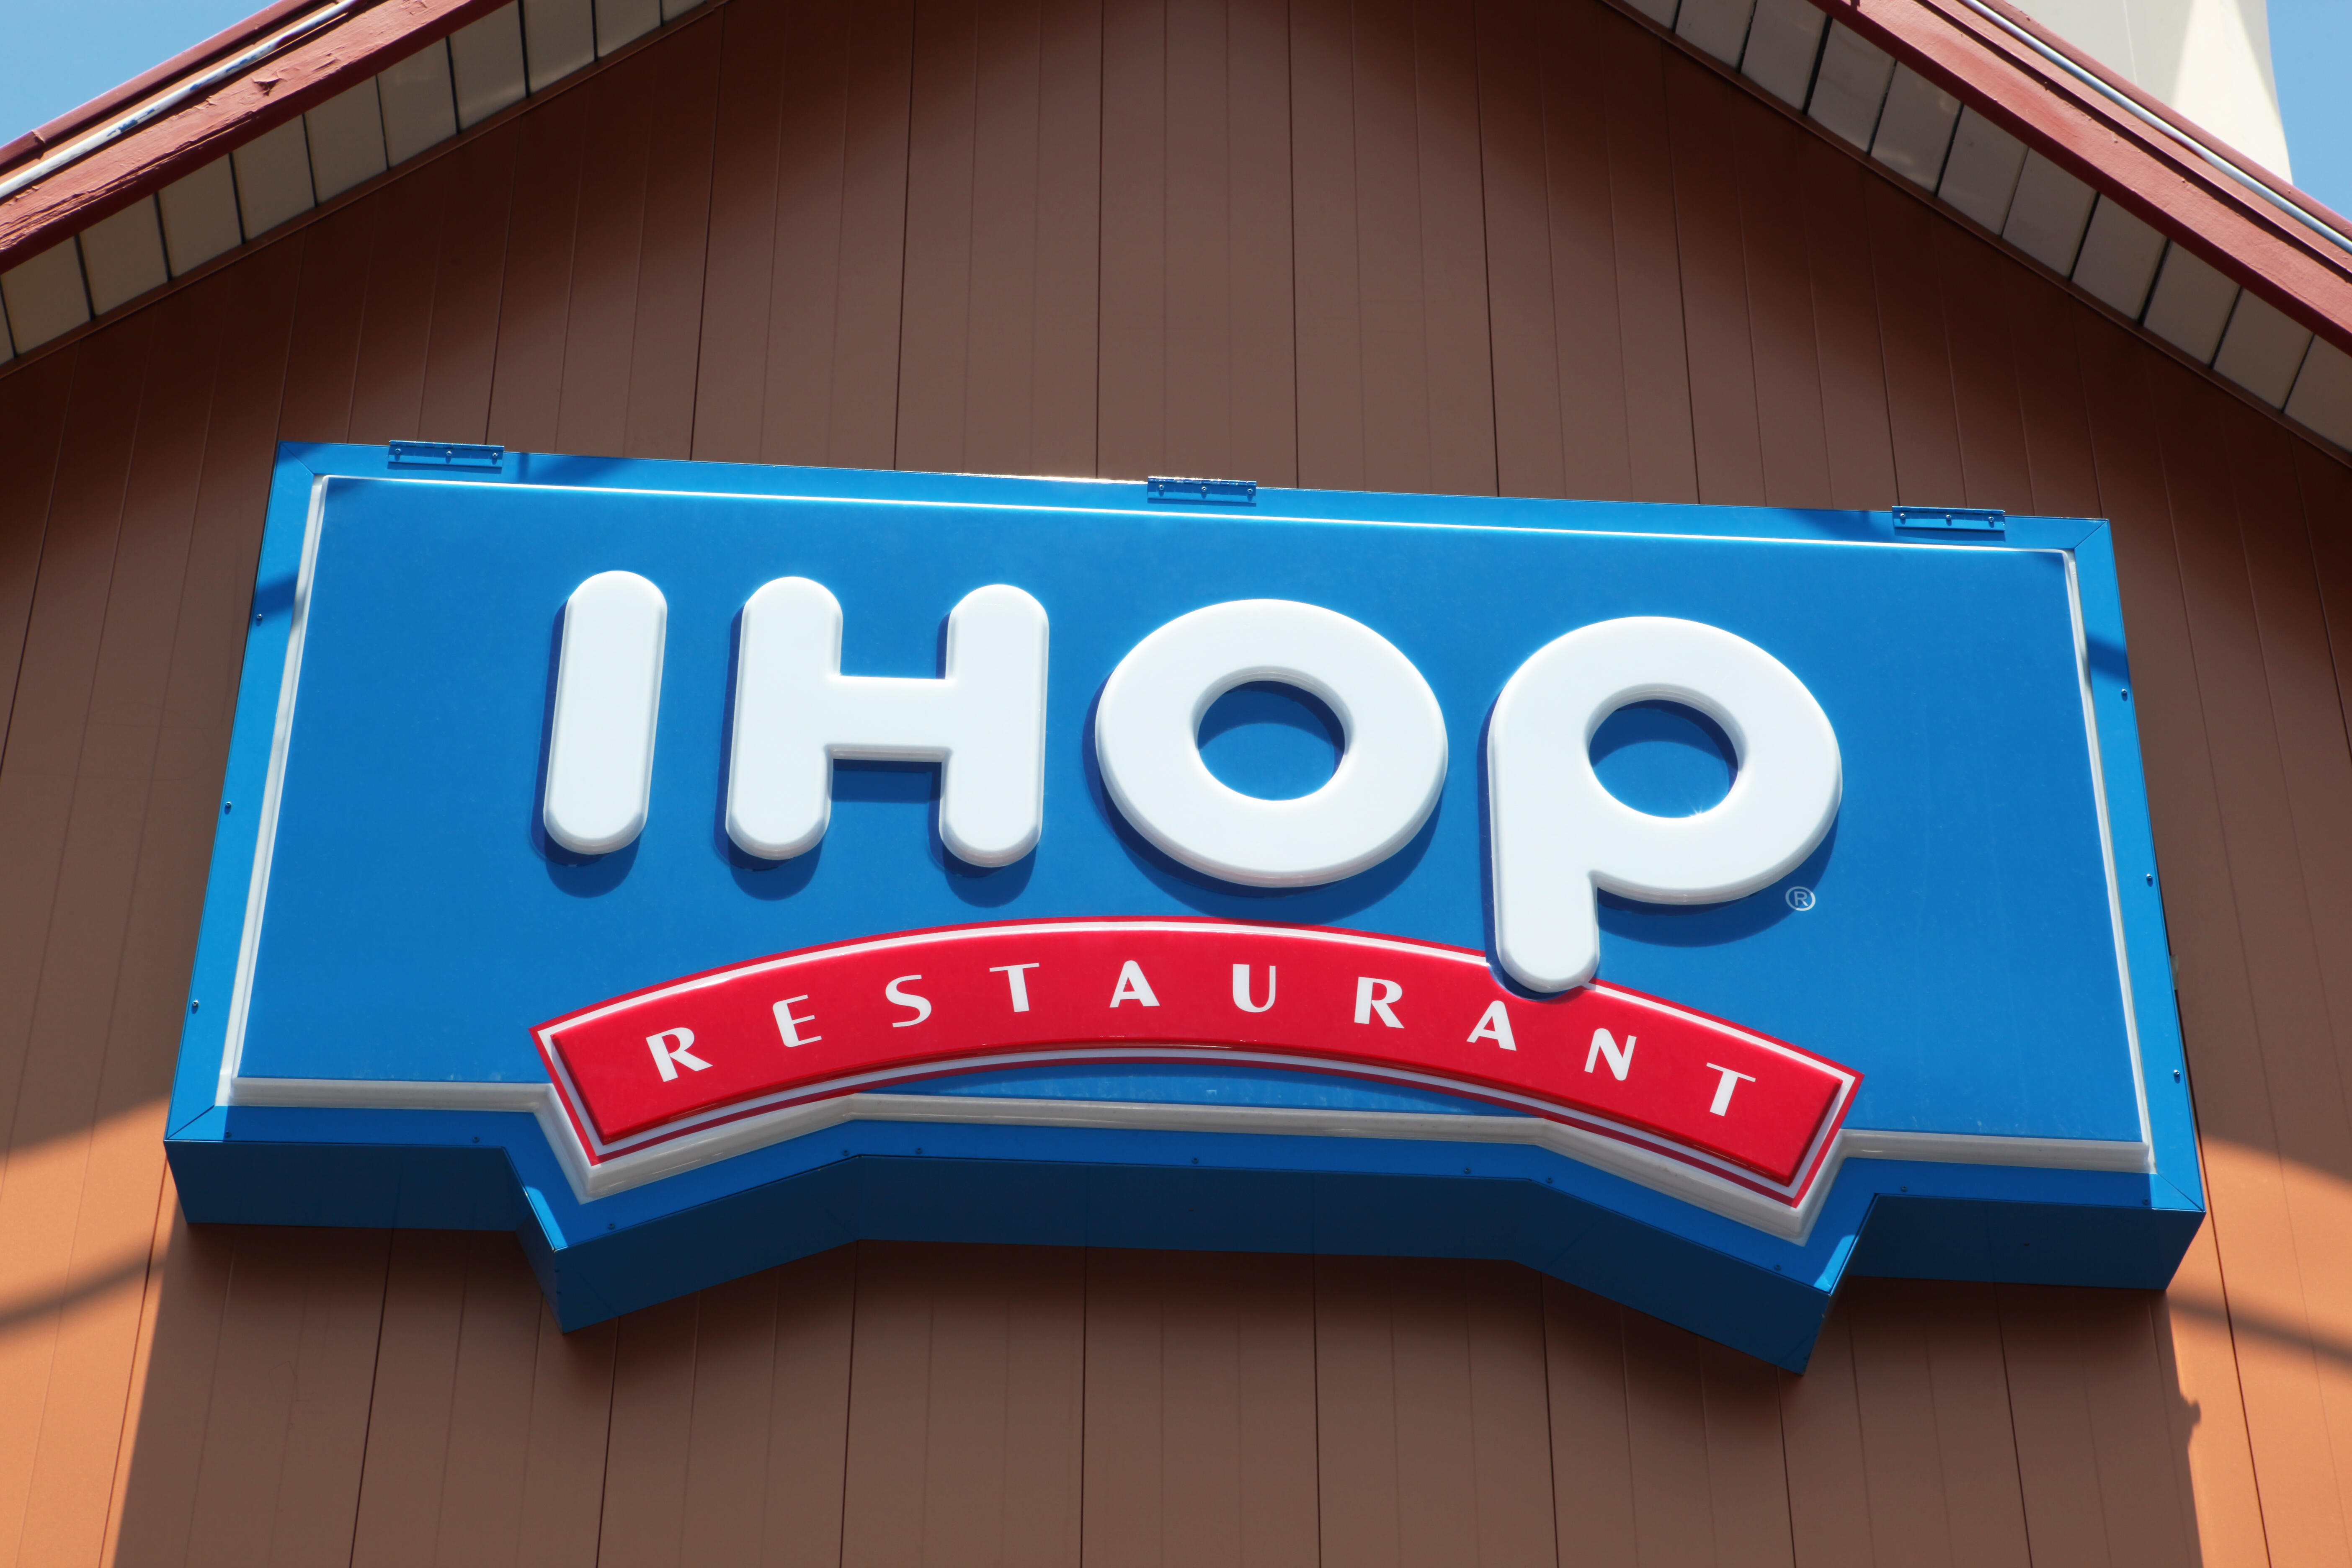 IHOP Launches Alcohol Menu with Mimosas, Beer, and Wine